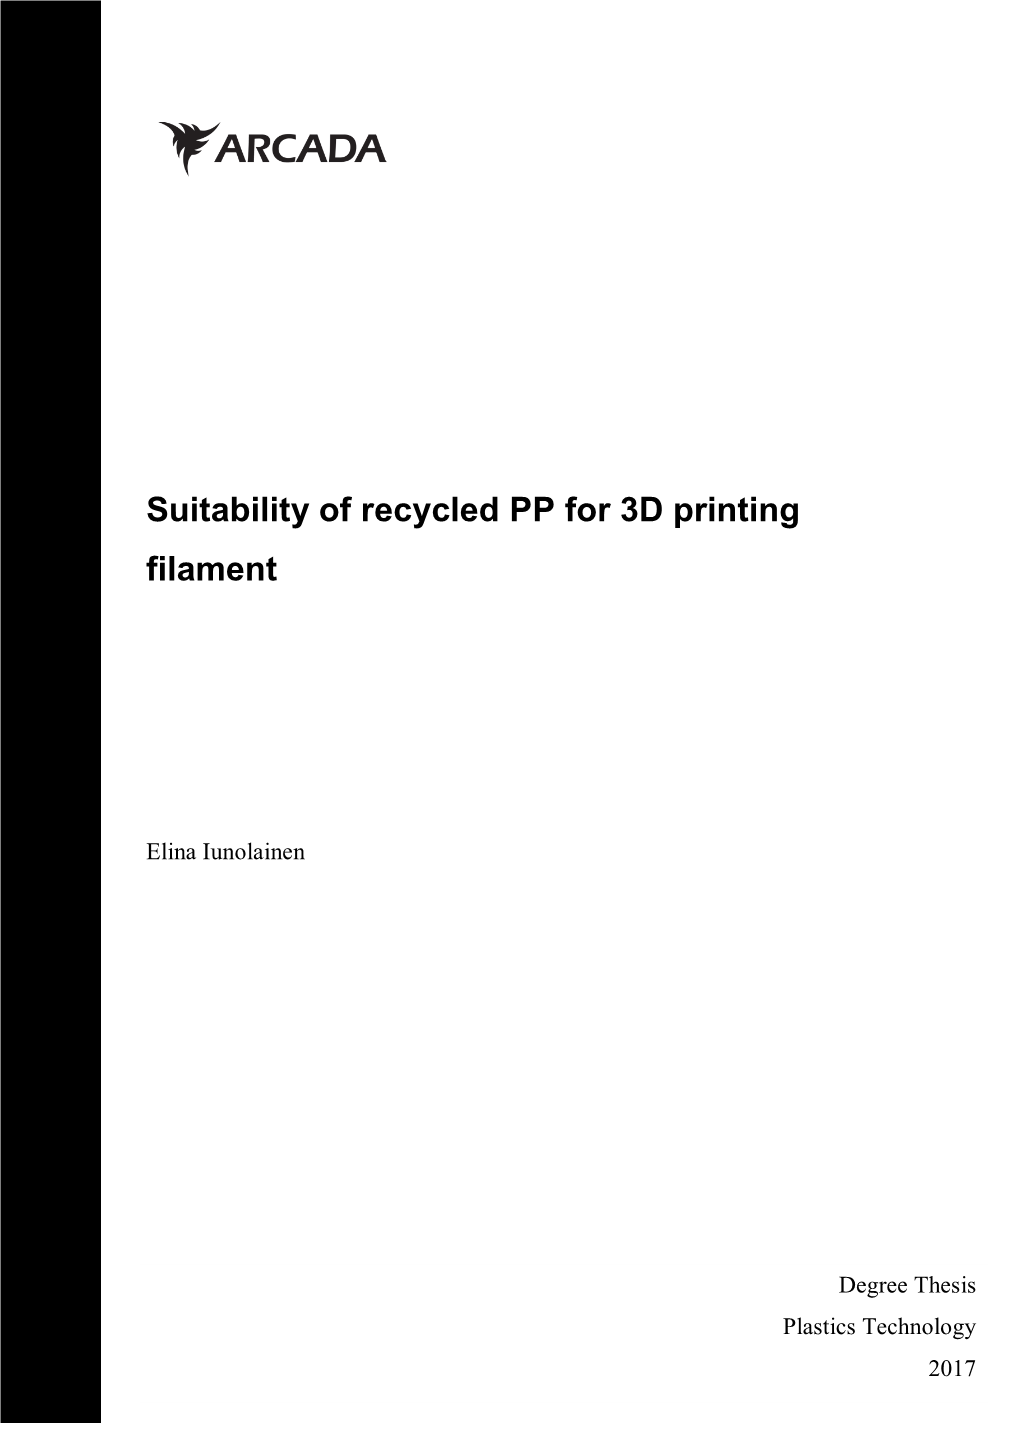 Suitability of Recycled PP for 3D Printing Filament